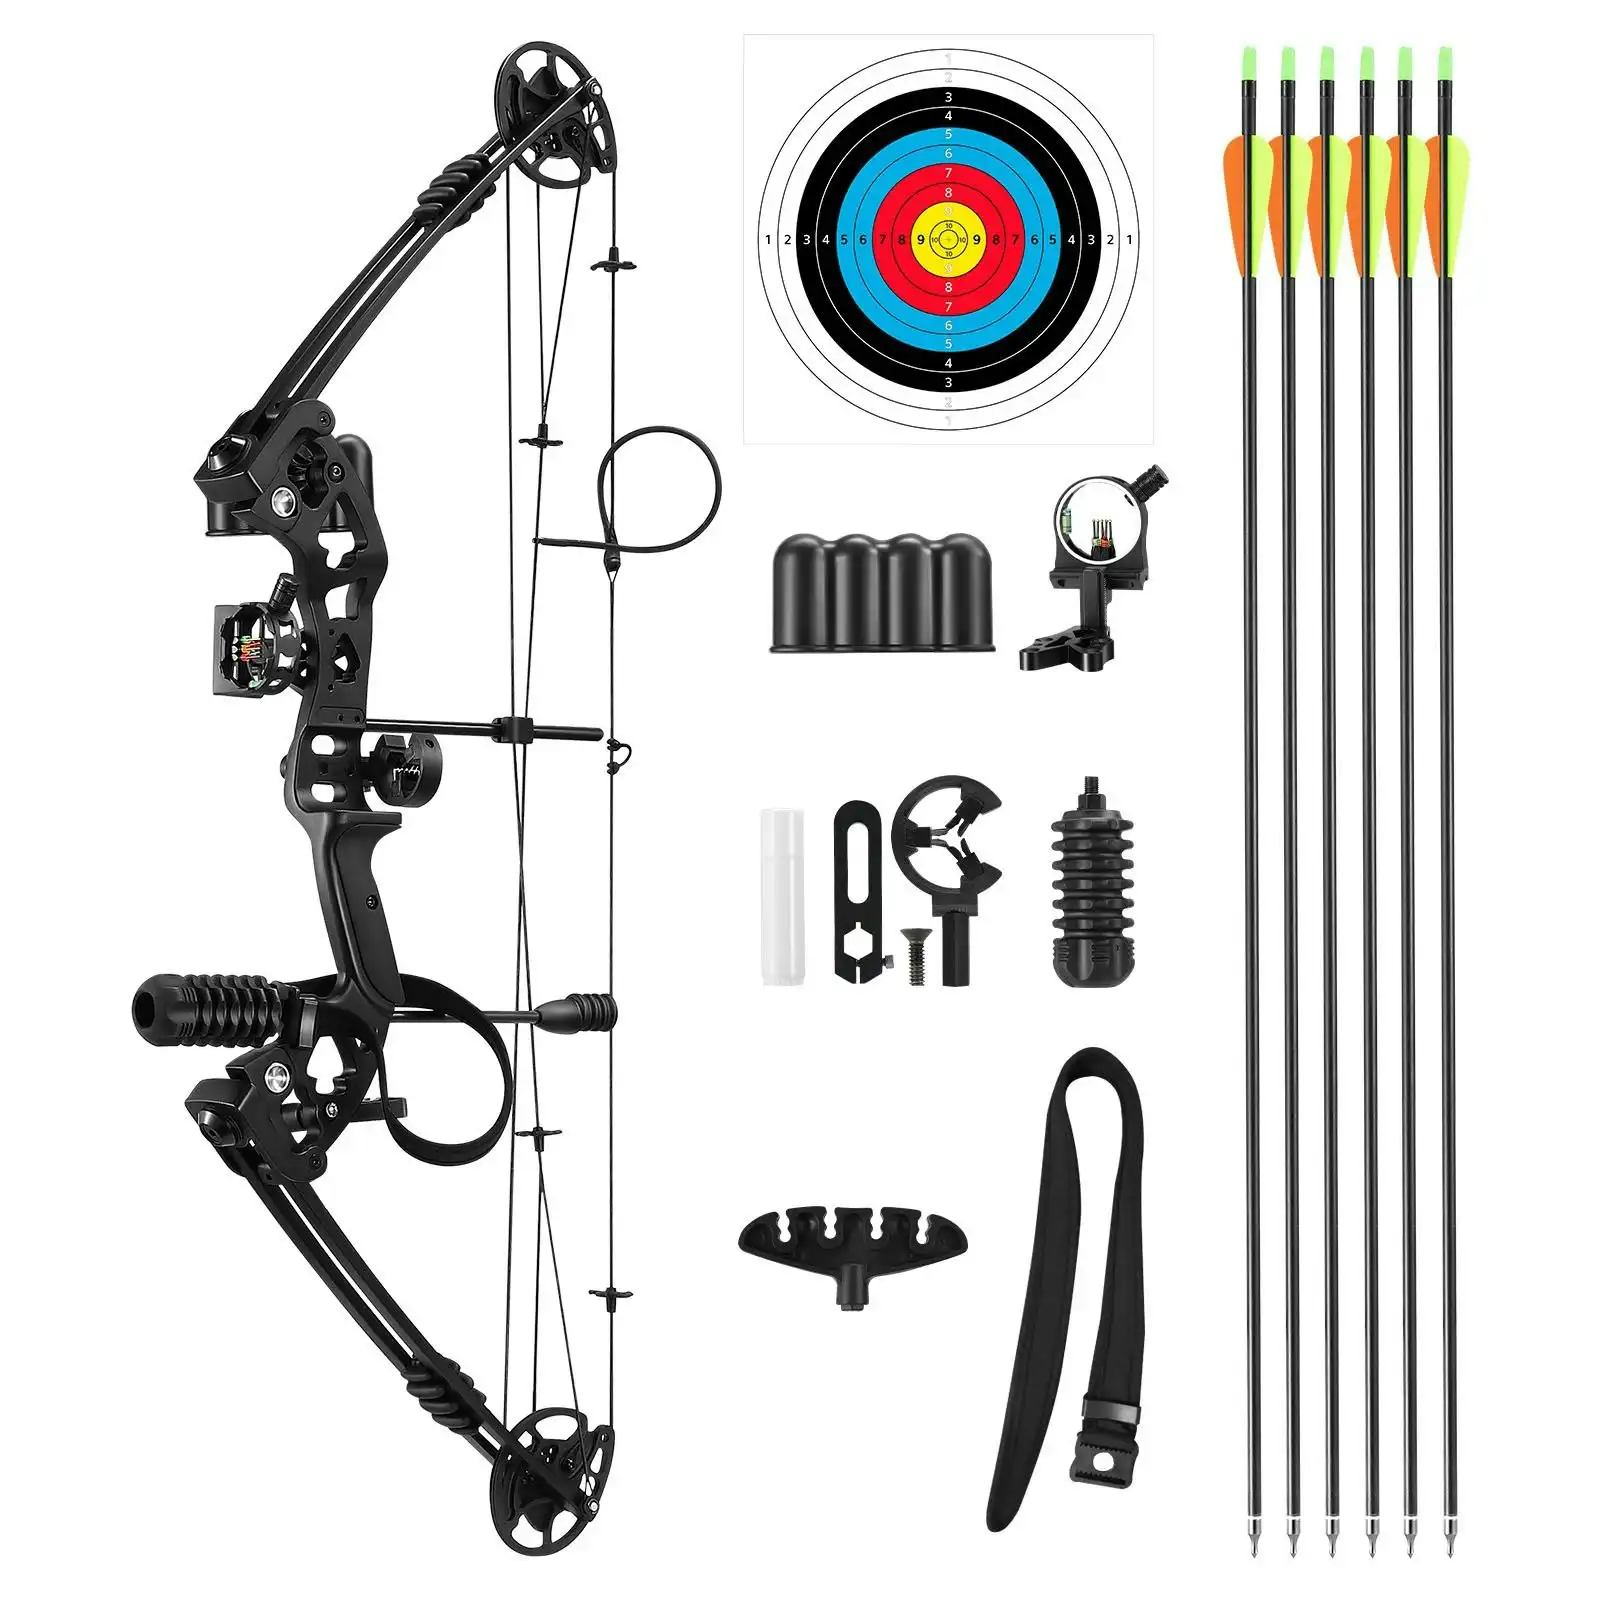 Ausway Compound Bow Arrow Set Archery Hunting Sports Equipment Target Shooting 20-55lbs Right Handed for Beginner Master Black